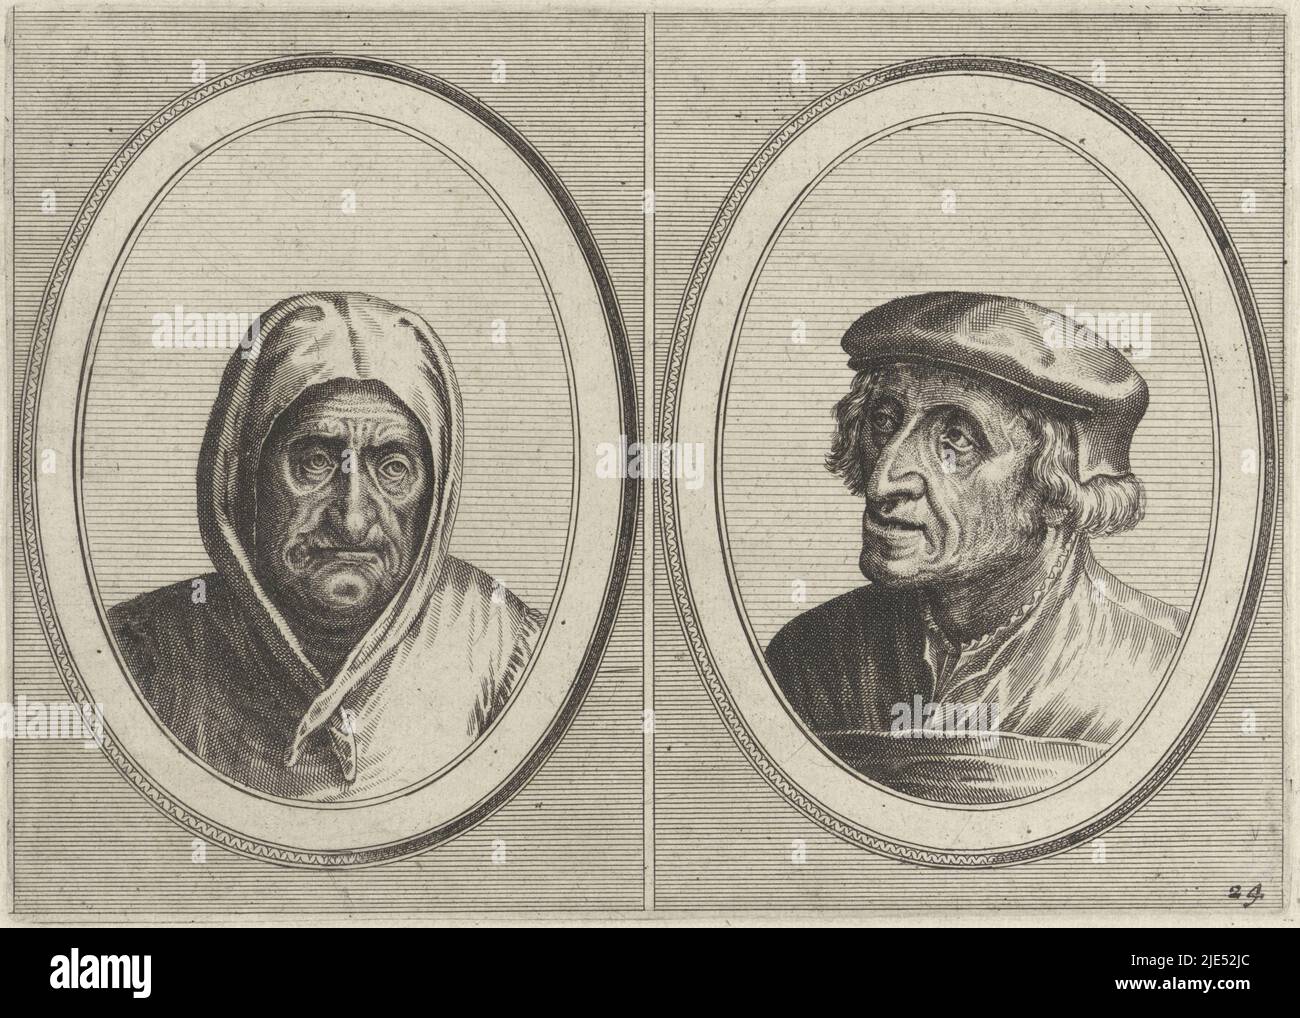 Print from a series of 36 prints with heads of farmers and farmer's wives, Aecht Sonder-Ziel and Heertje Al-te-mooy Boerenkoppen (title series), print maker: Johannes of Lucas van Doetechum, (possibly), Pieter Bruegel (I), publisher: Claes Jansz. Visscher (II), Amsterdam, 1612 - 1652, paper, etching, engraving, h 133 mm × w 187 mm Stock Photo